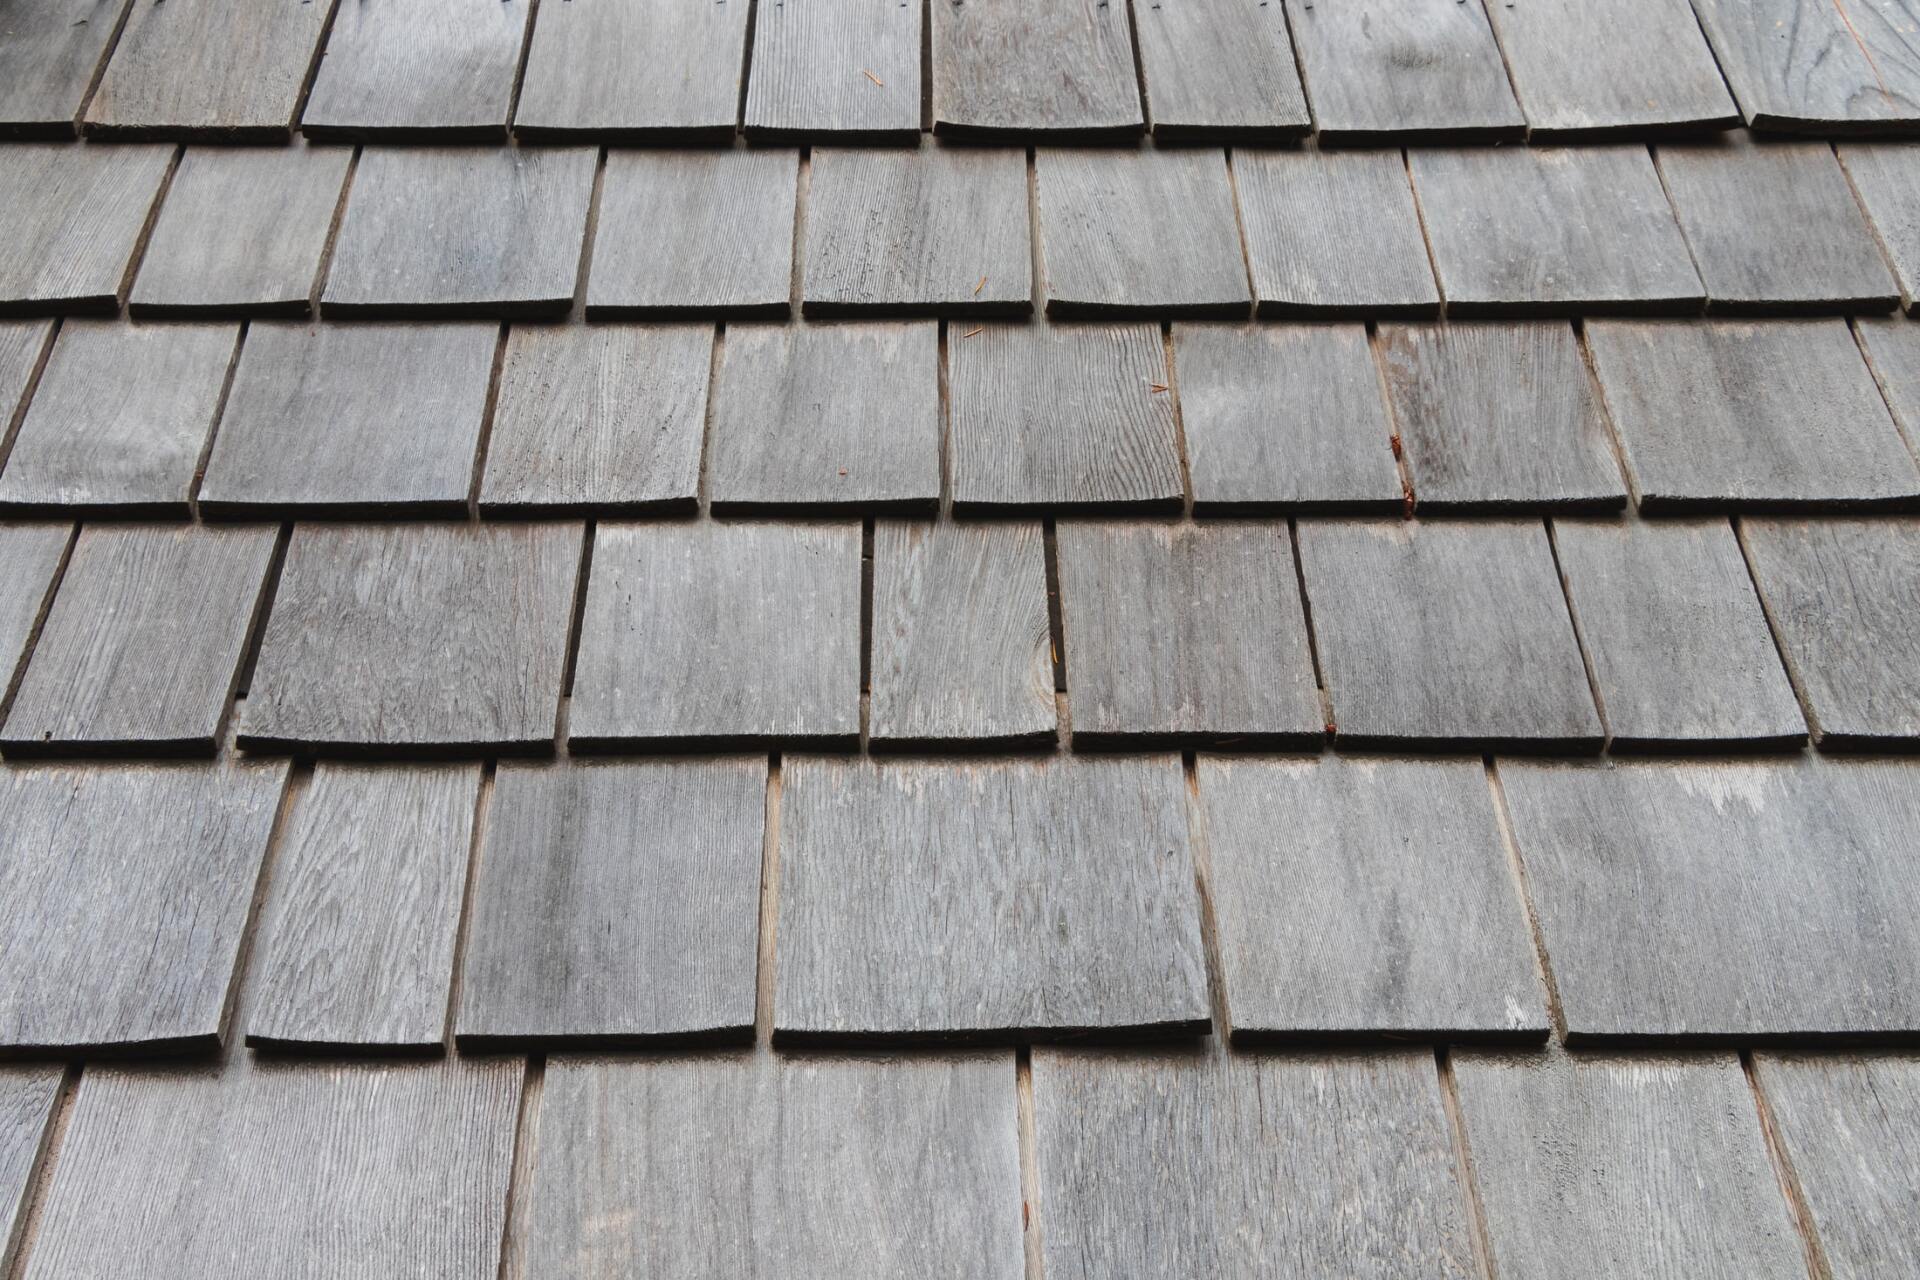 This is a photo of shingles on the roof of a house. A lot of items may land on your roof and wash down to the gutters when it rains, causing clogs.